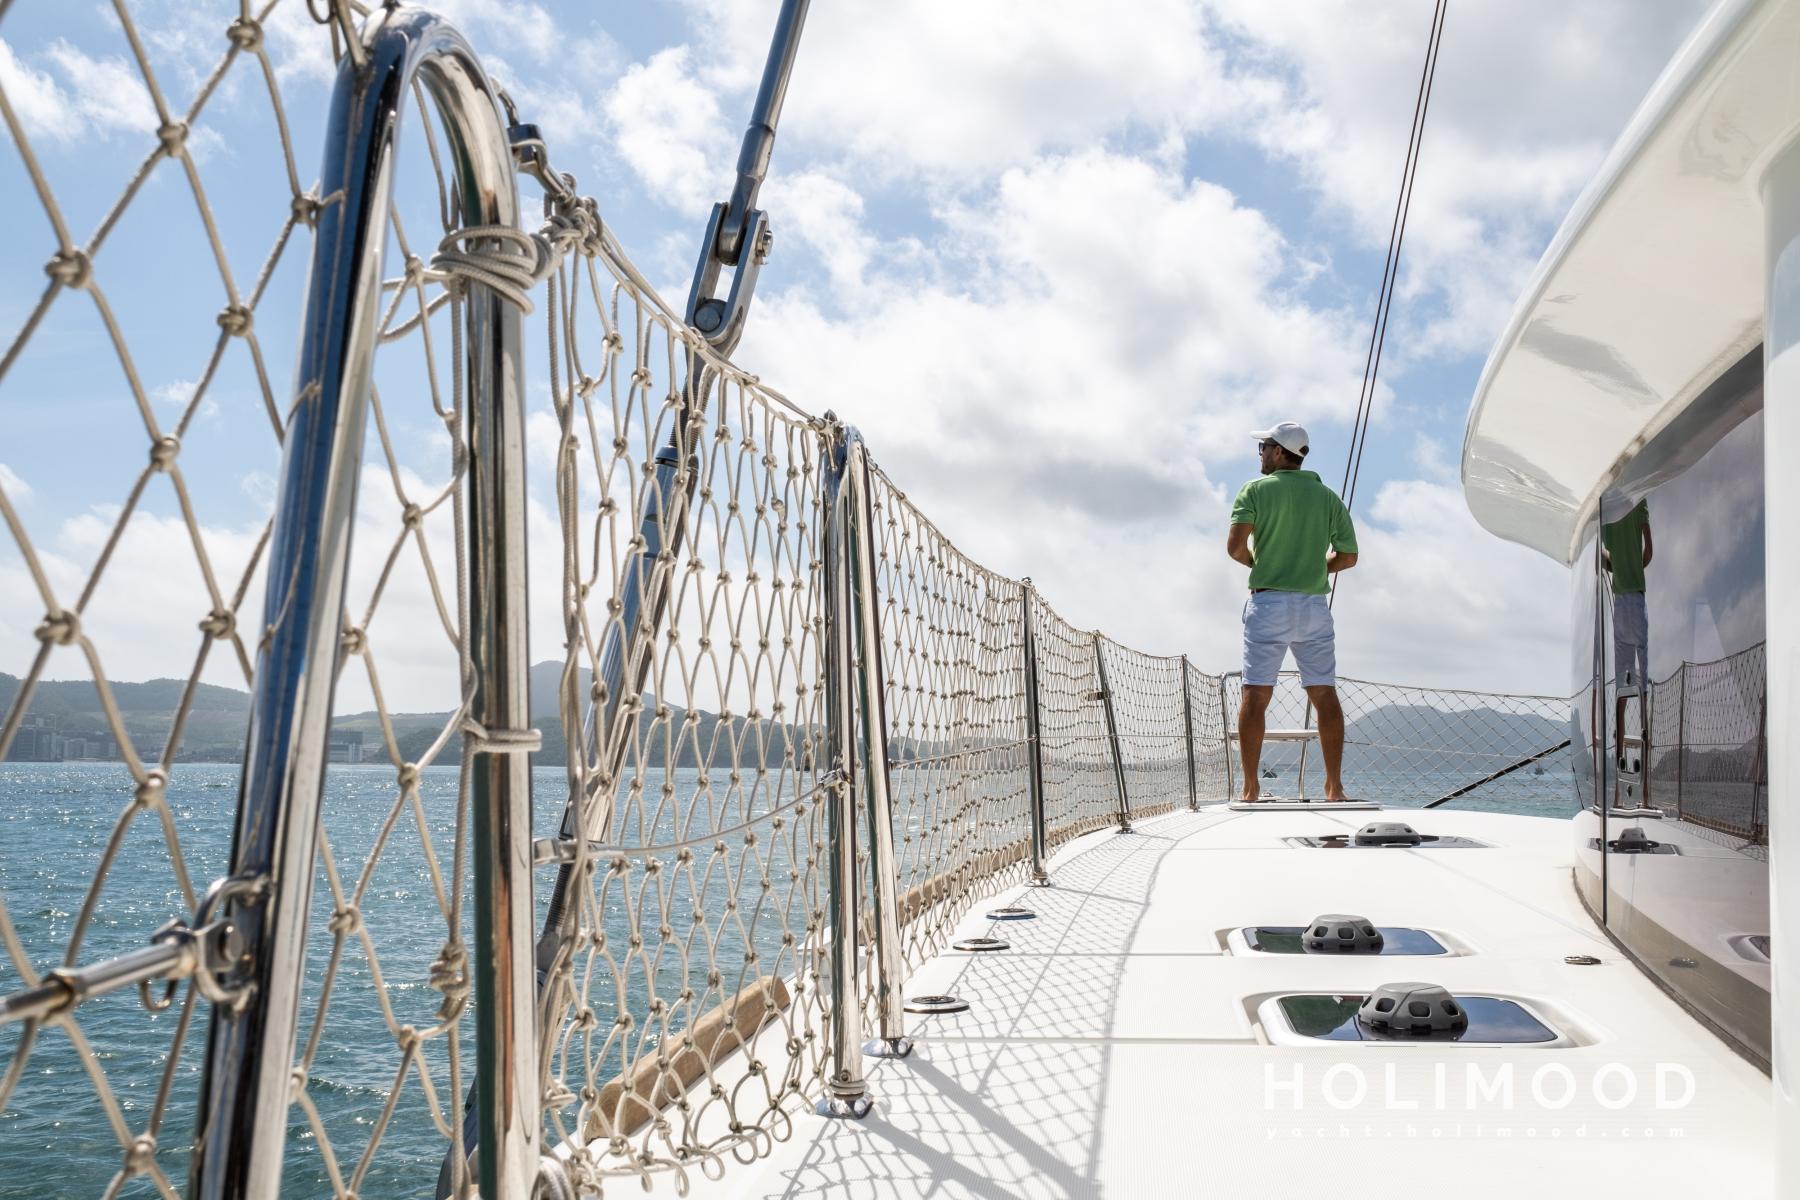 SL01 48-Hour Upgraded Luxury Catamaran Sailing Voyage, an unforgettable 3 days and 2 nights sea experience 33